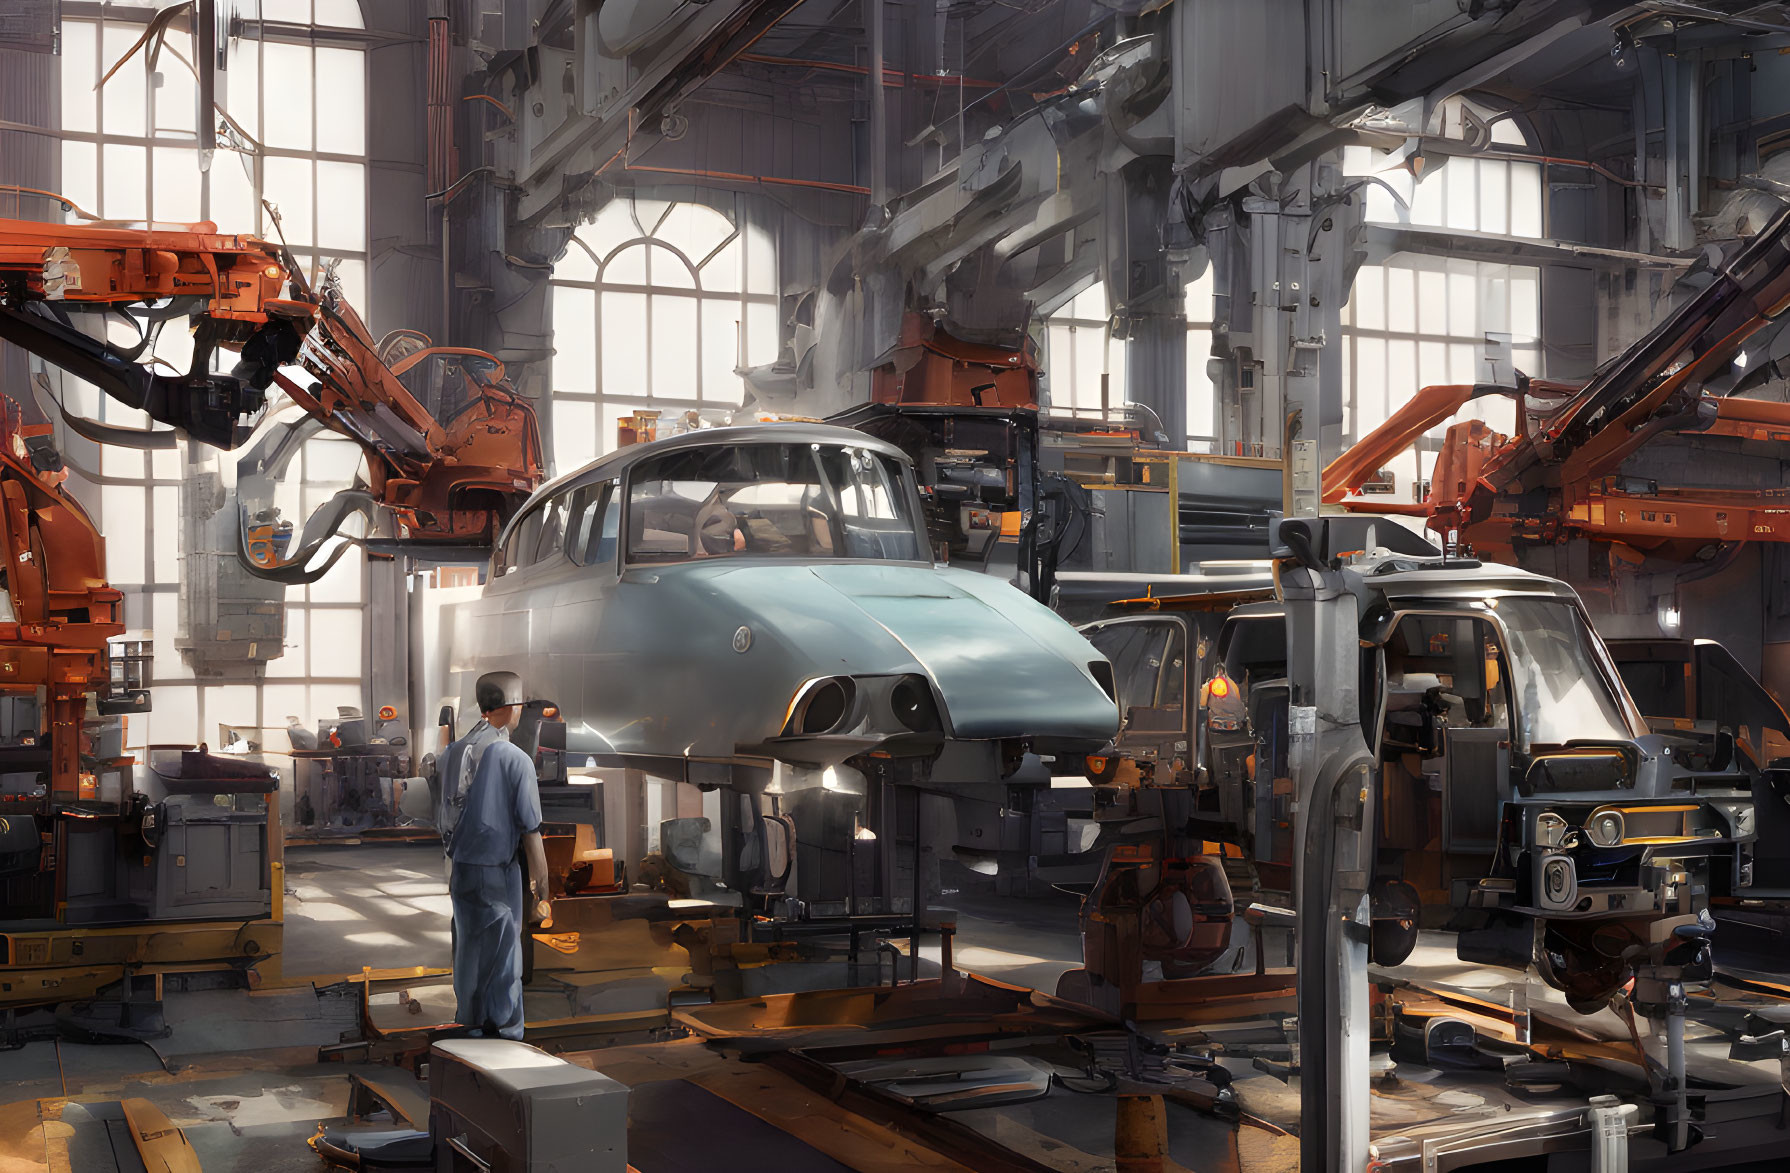 Futuristic industrial hangar with robots assembling advanced vehicle